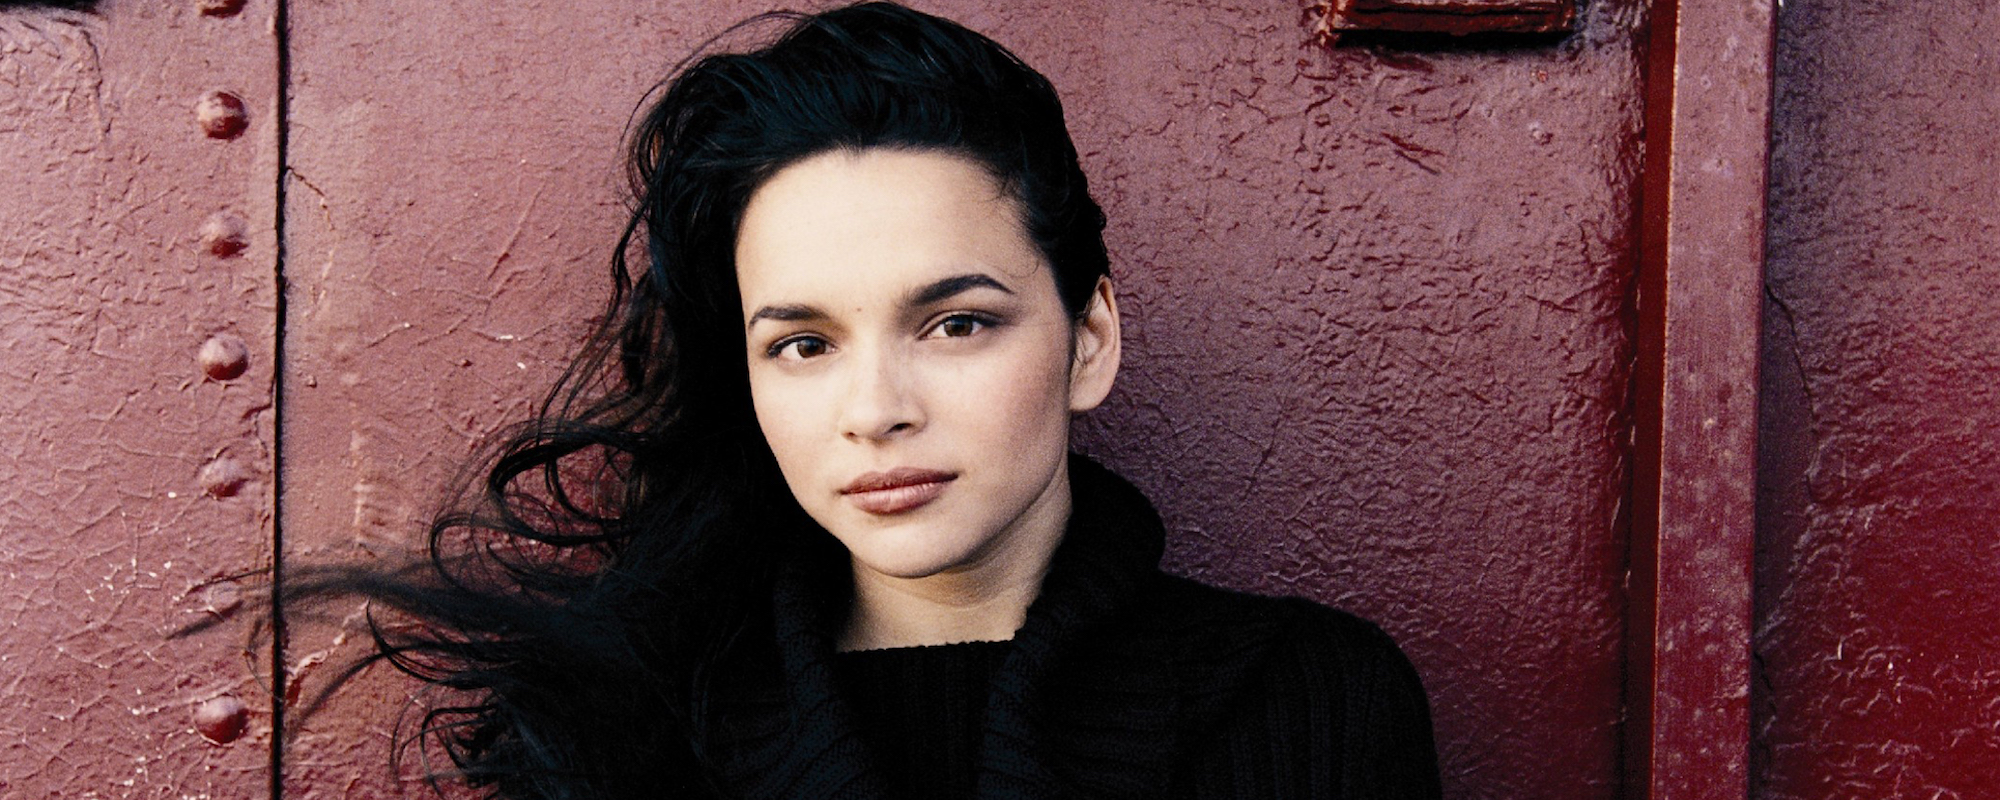 New Song Sunday! Hear New Tracks From Norah Jones, Jack Harlow, Dolly Parton, and More